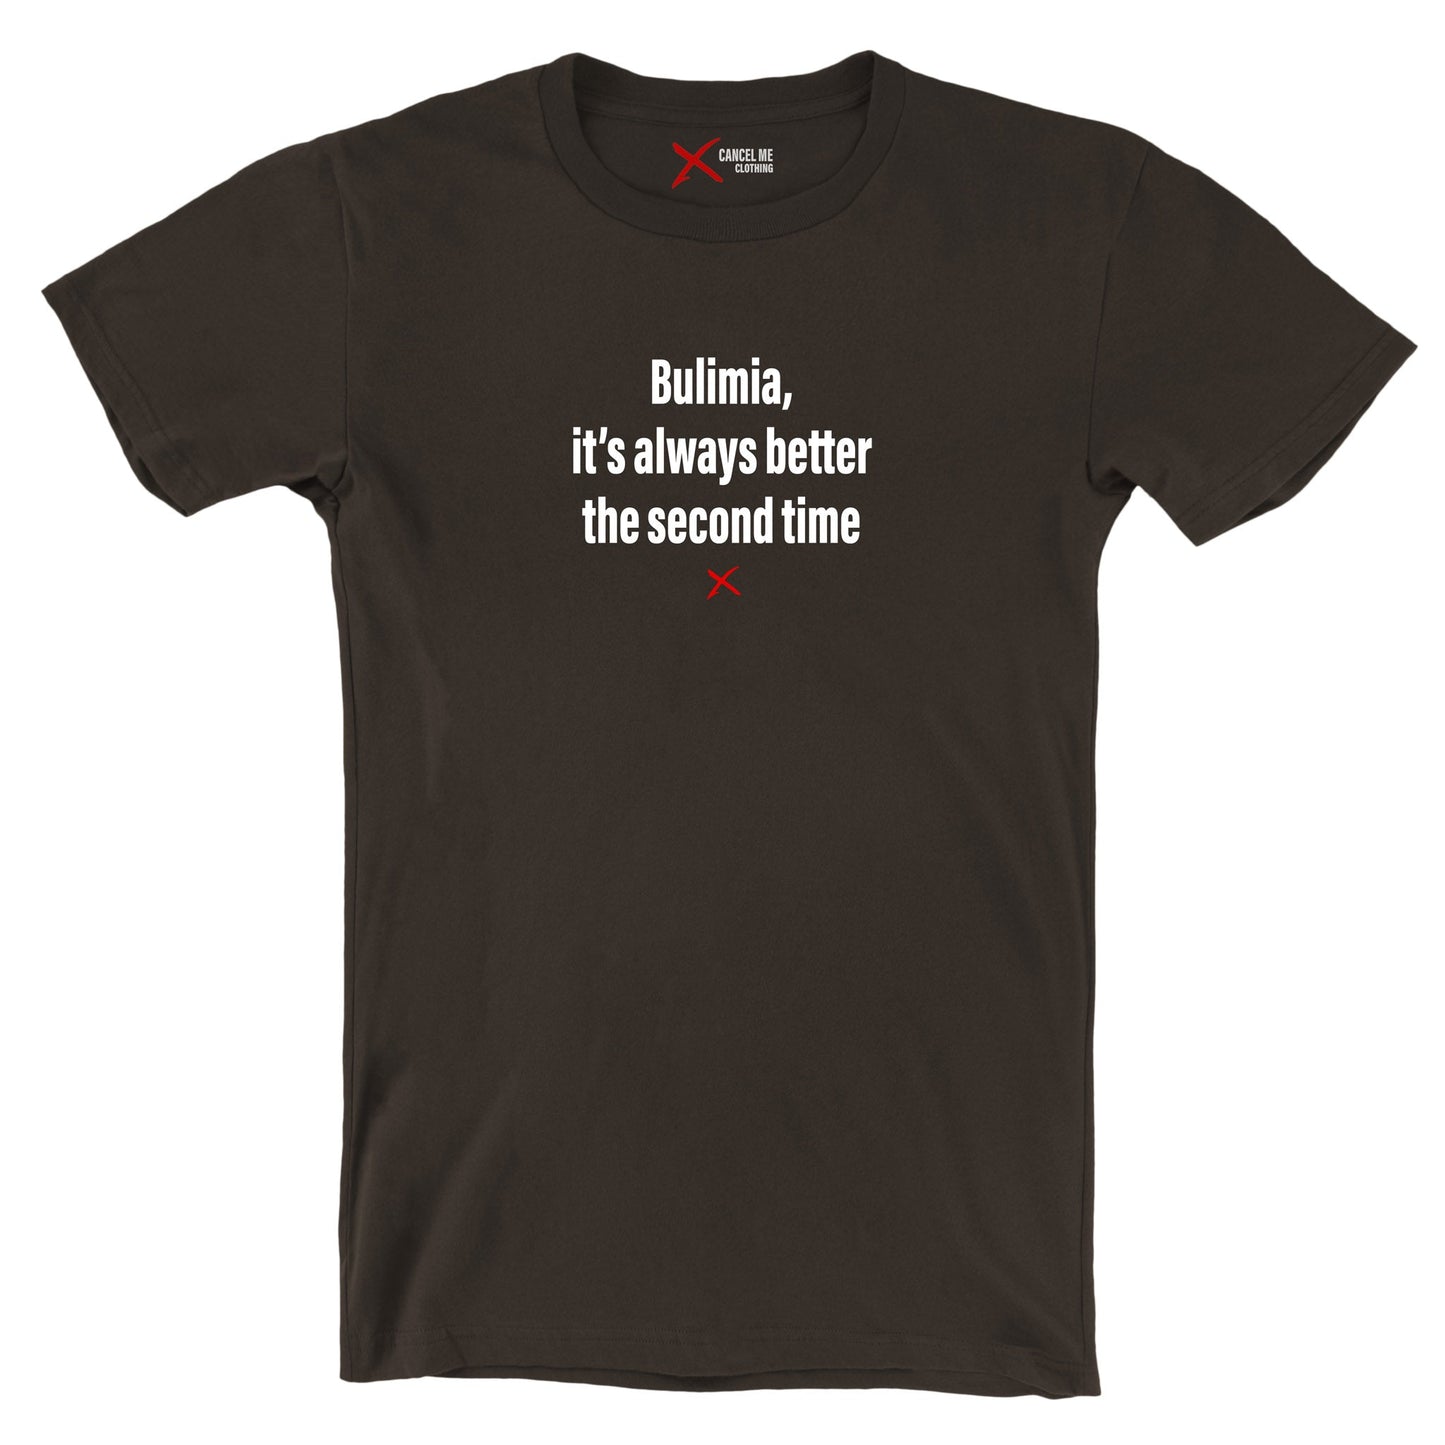 Bulimia, it's always better the second time - Shirt